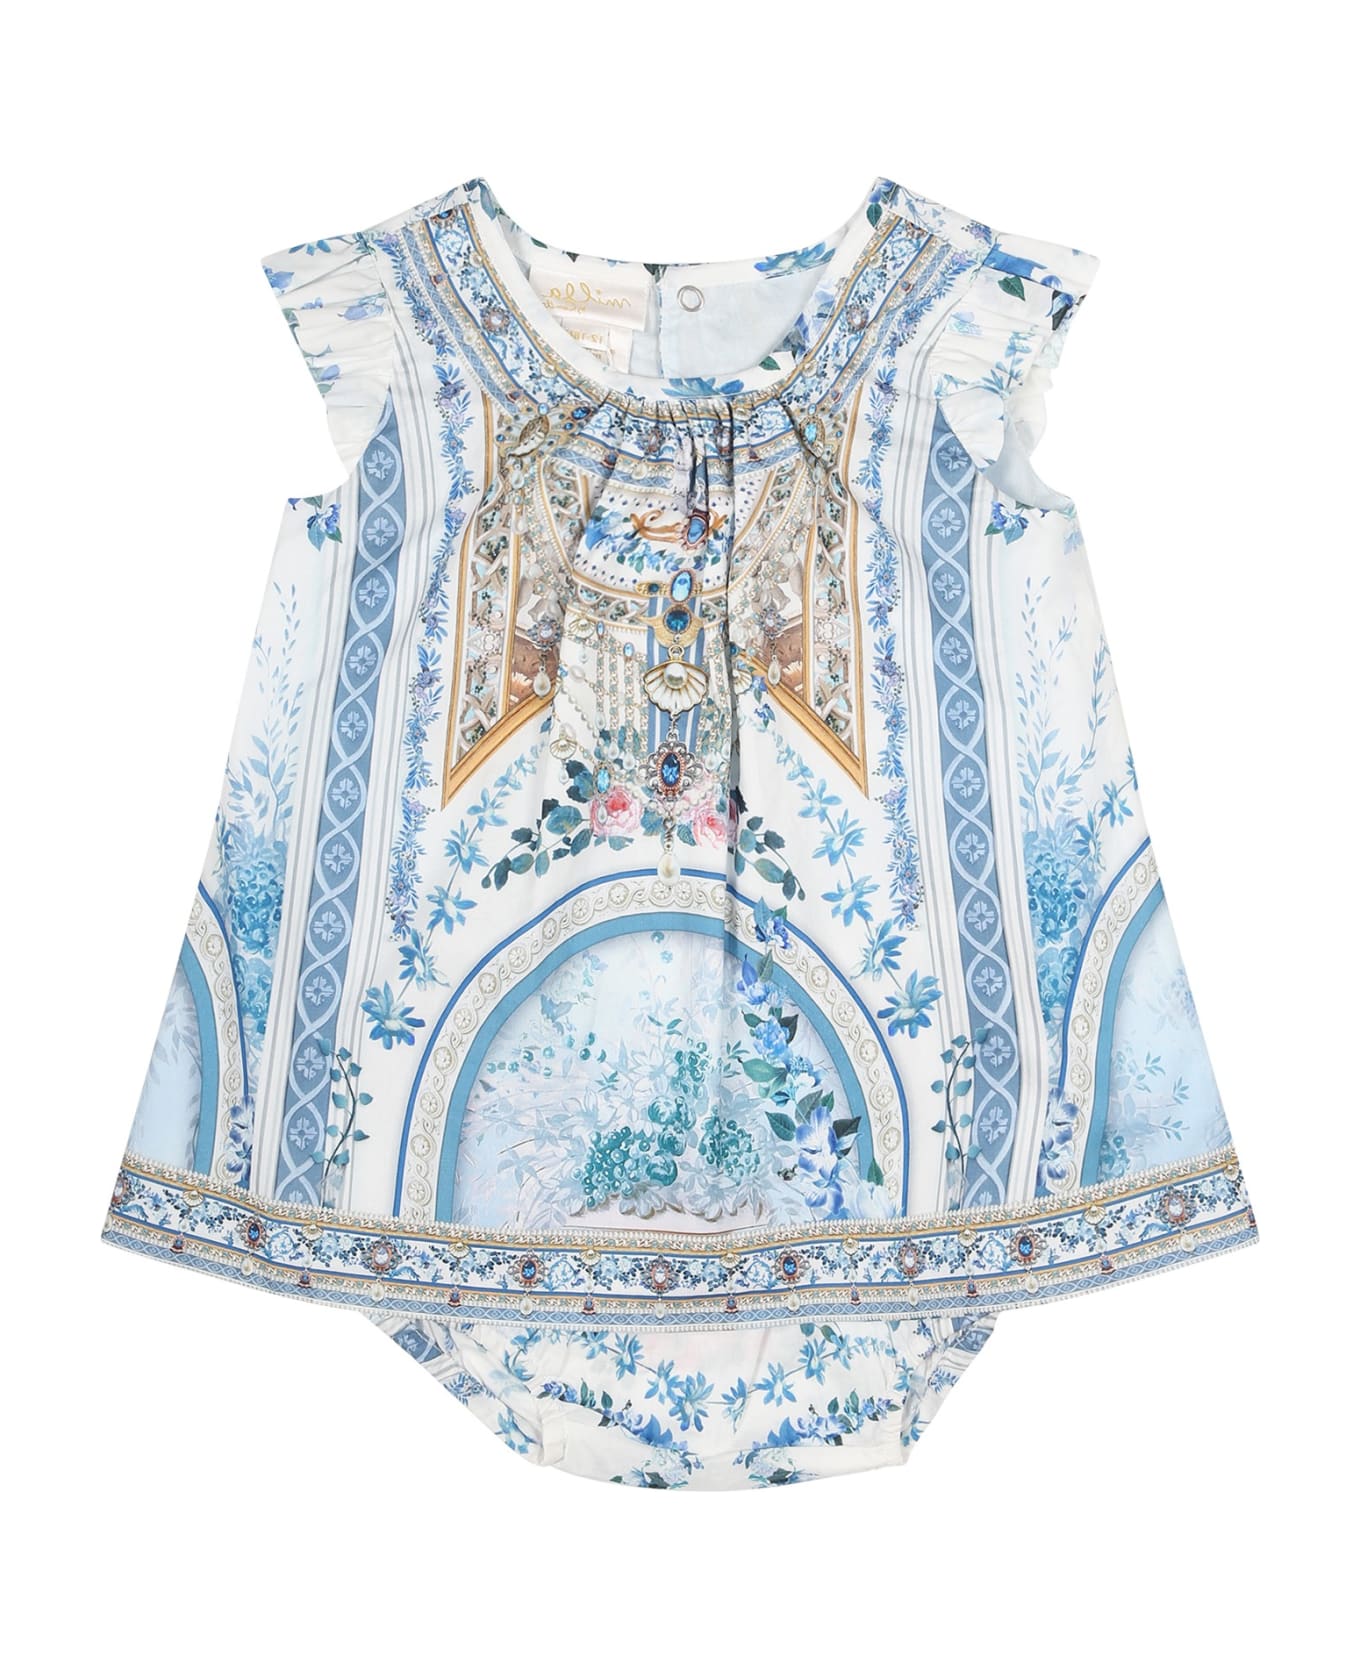 Camilla Light Blue Dress For Baby Girl With Floral Print - Light Blue